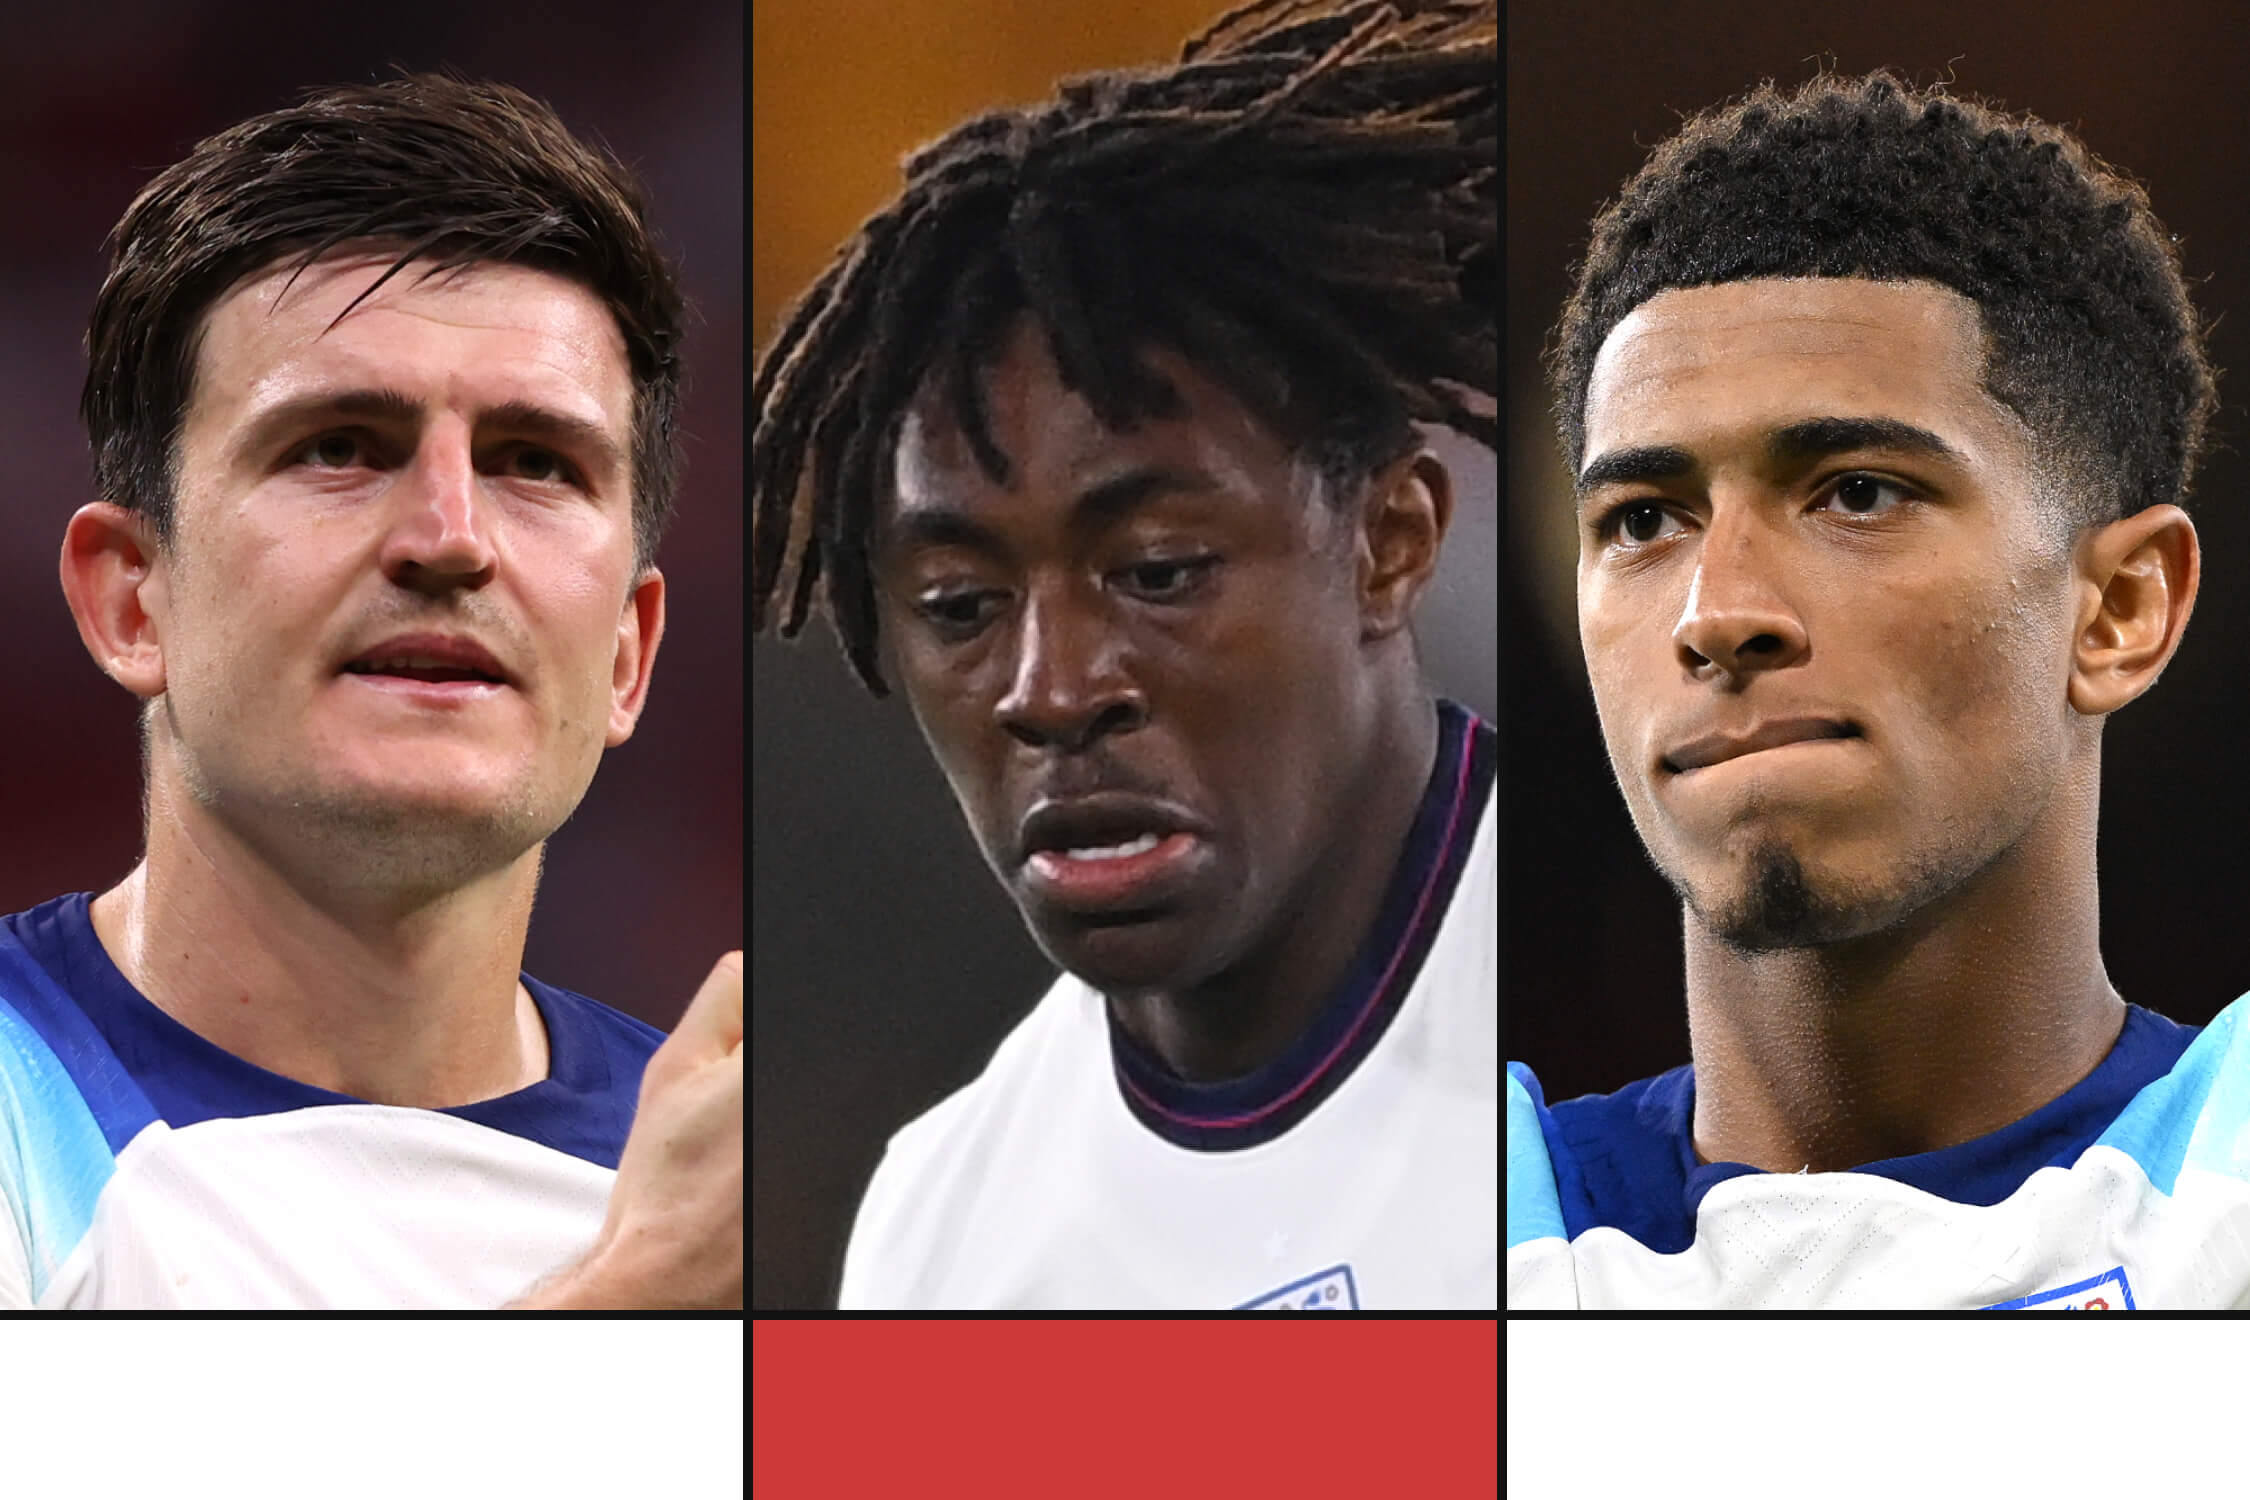 Ranking England's provisional Euro 2024 squad members - and whether they'll make final cut